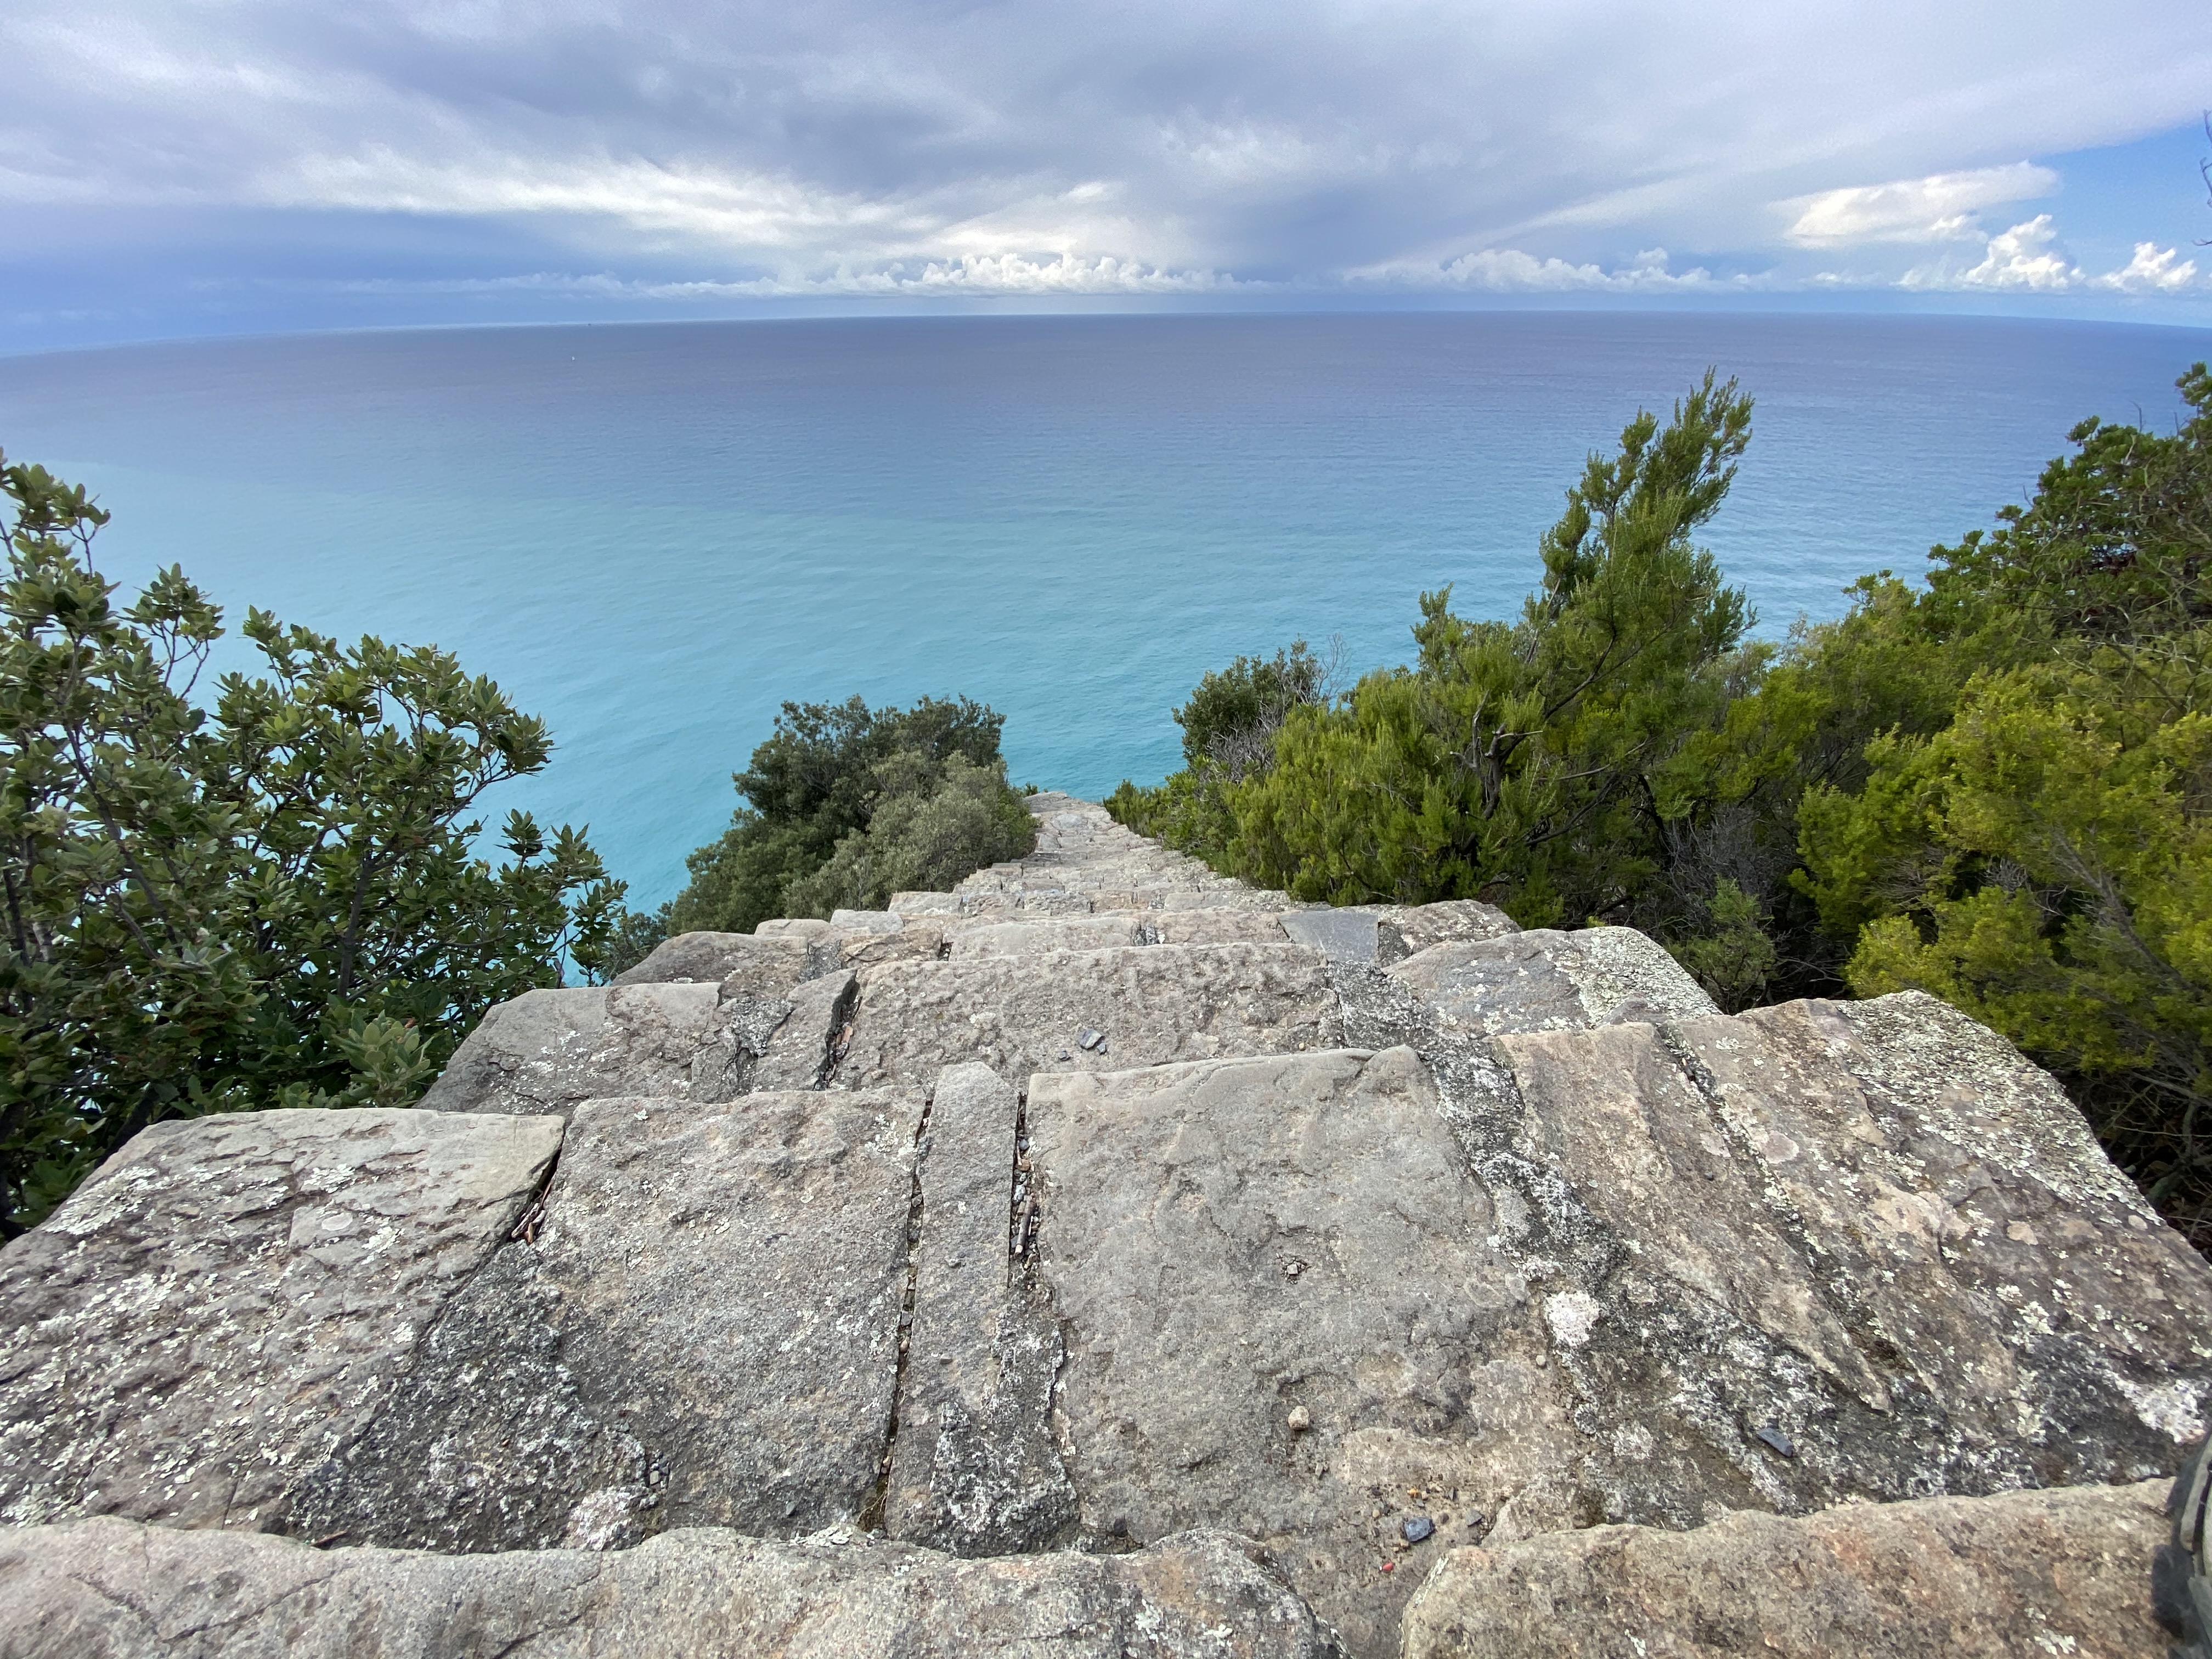 Long staircase of Tramonti territory